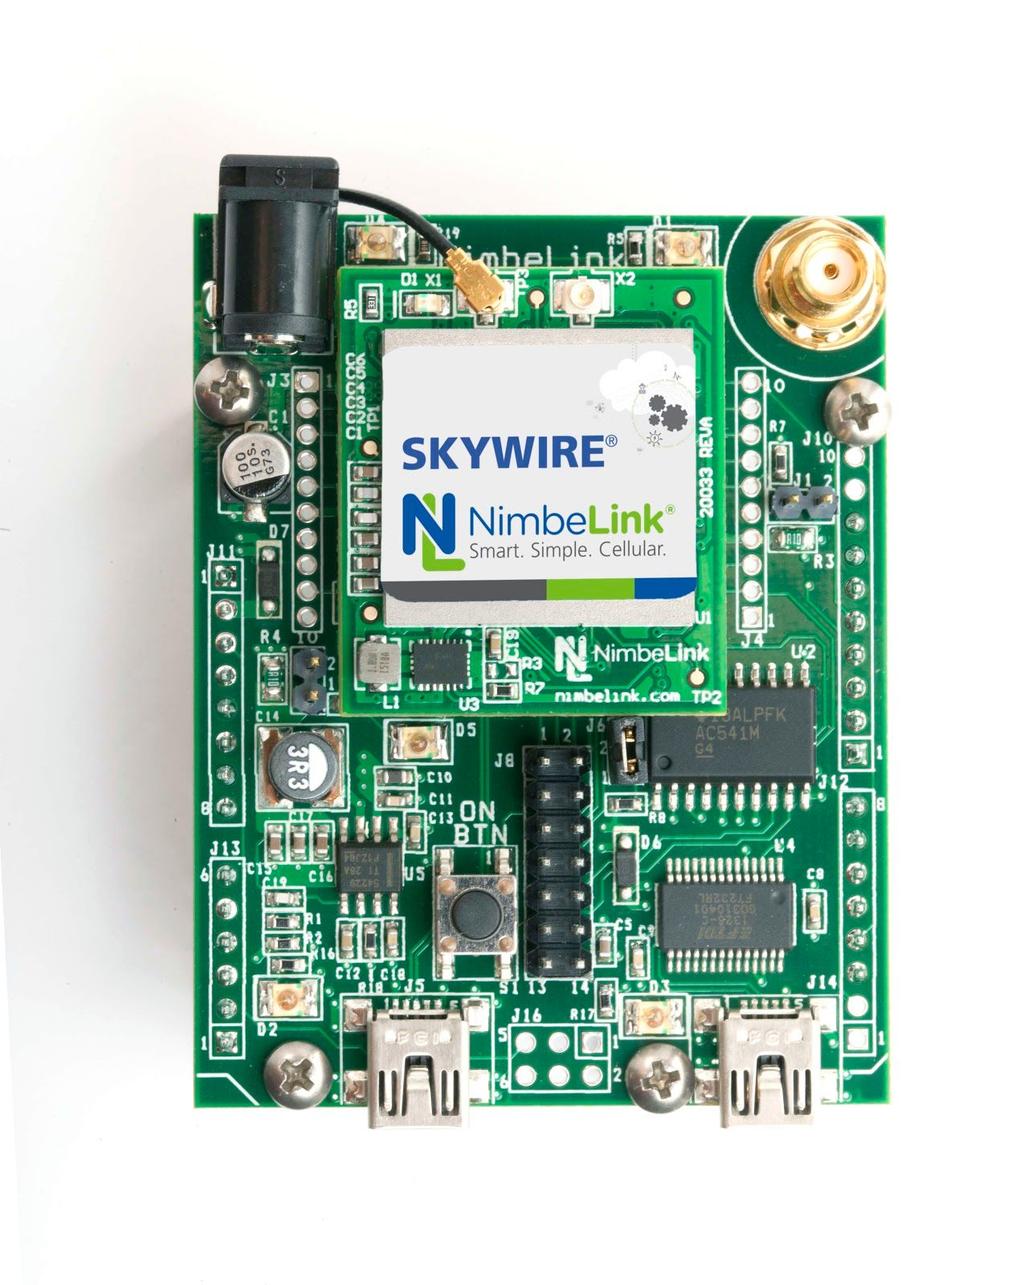 2.2 Skywire Placement To mount your Skywire Cellular modem follow these steps: 1. Gather the following: a. Skywire Development Kit board b. Skywire Cellular Modem c. U.